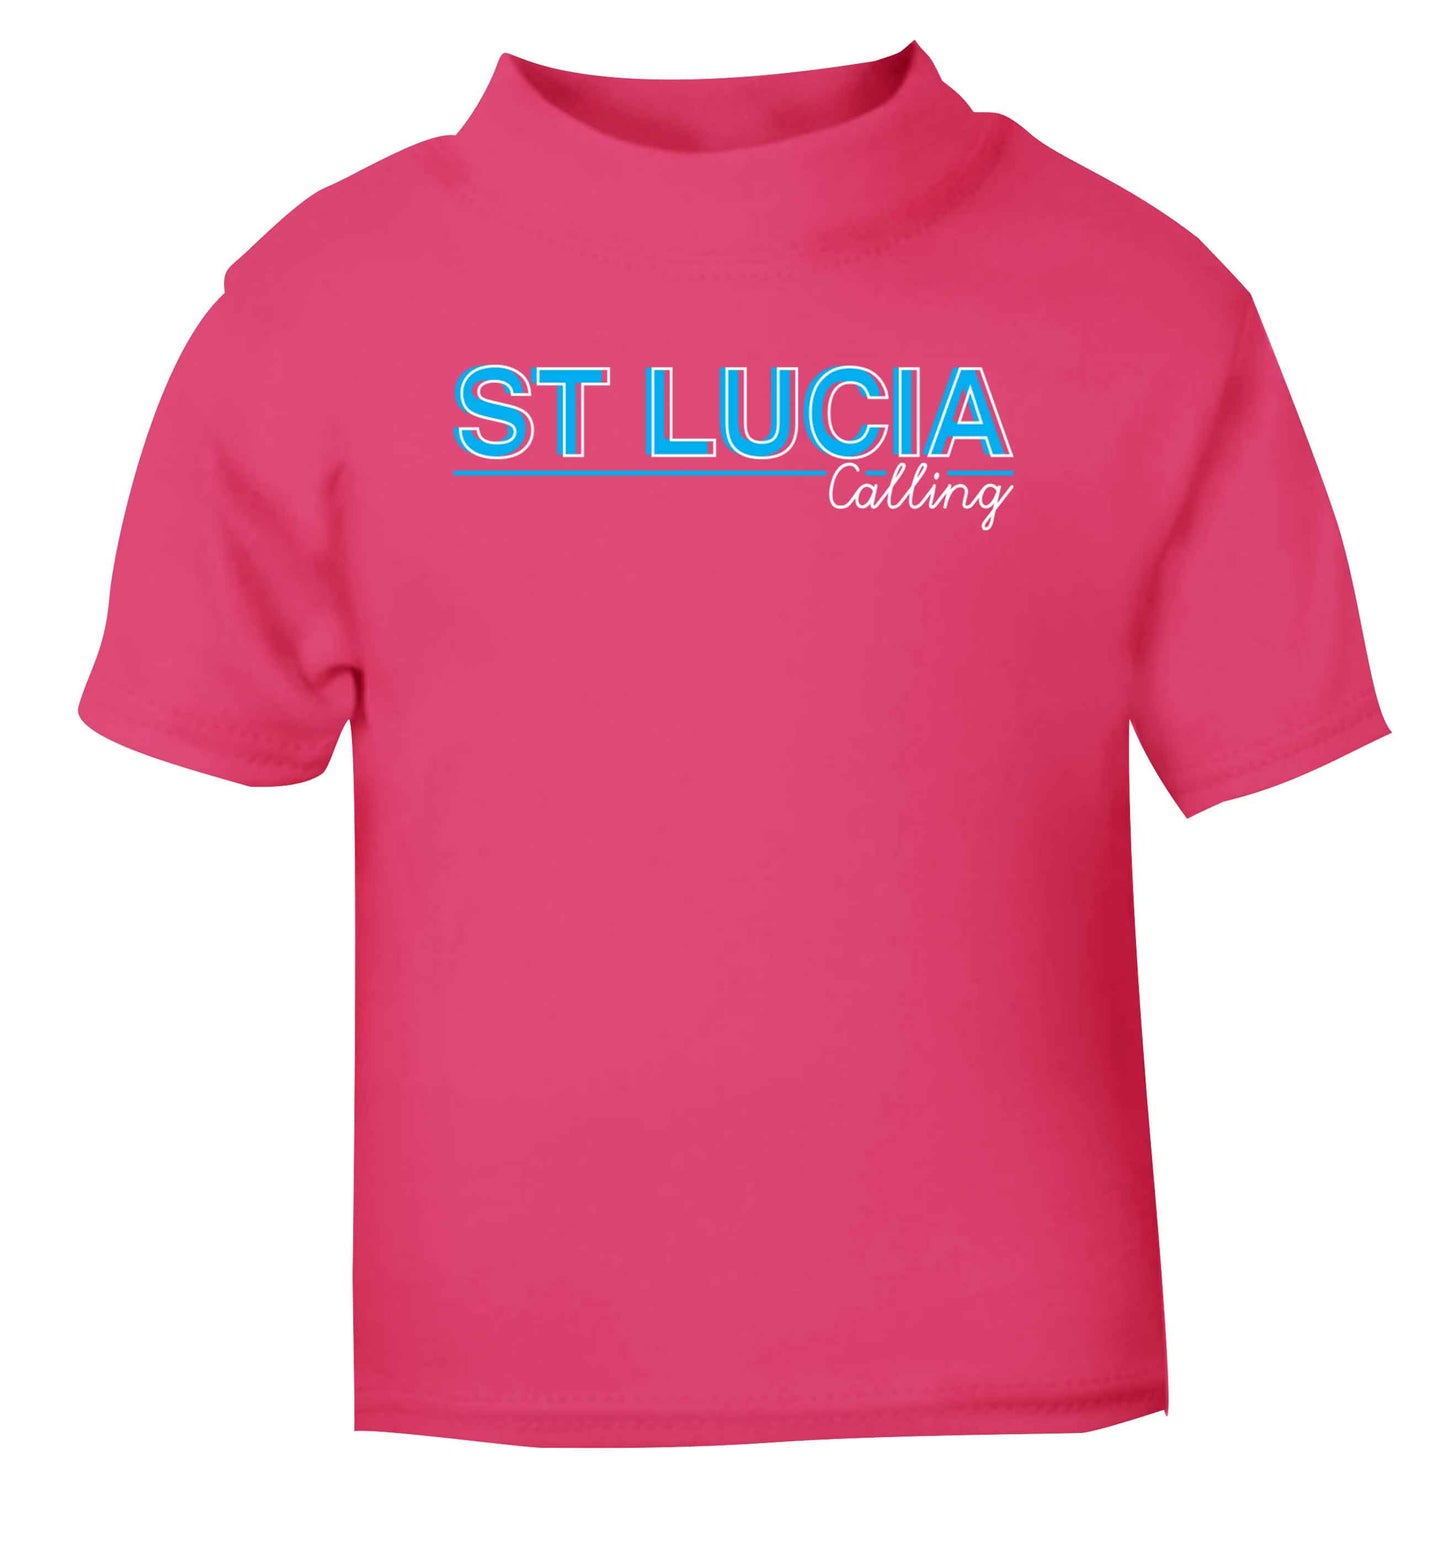 St Lucia calling pink Baby Toddler Tshirt 2 Years